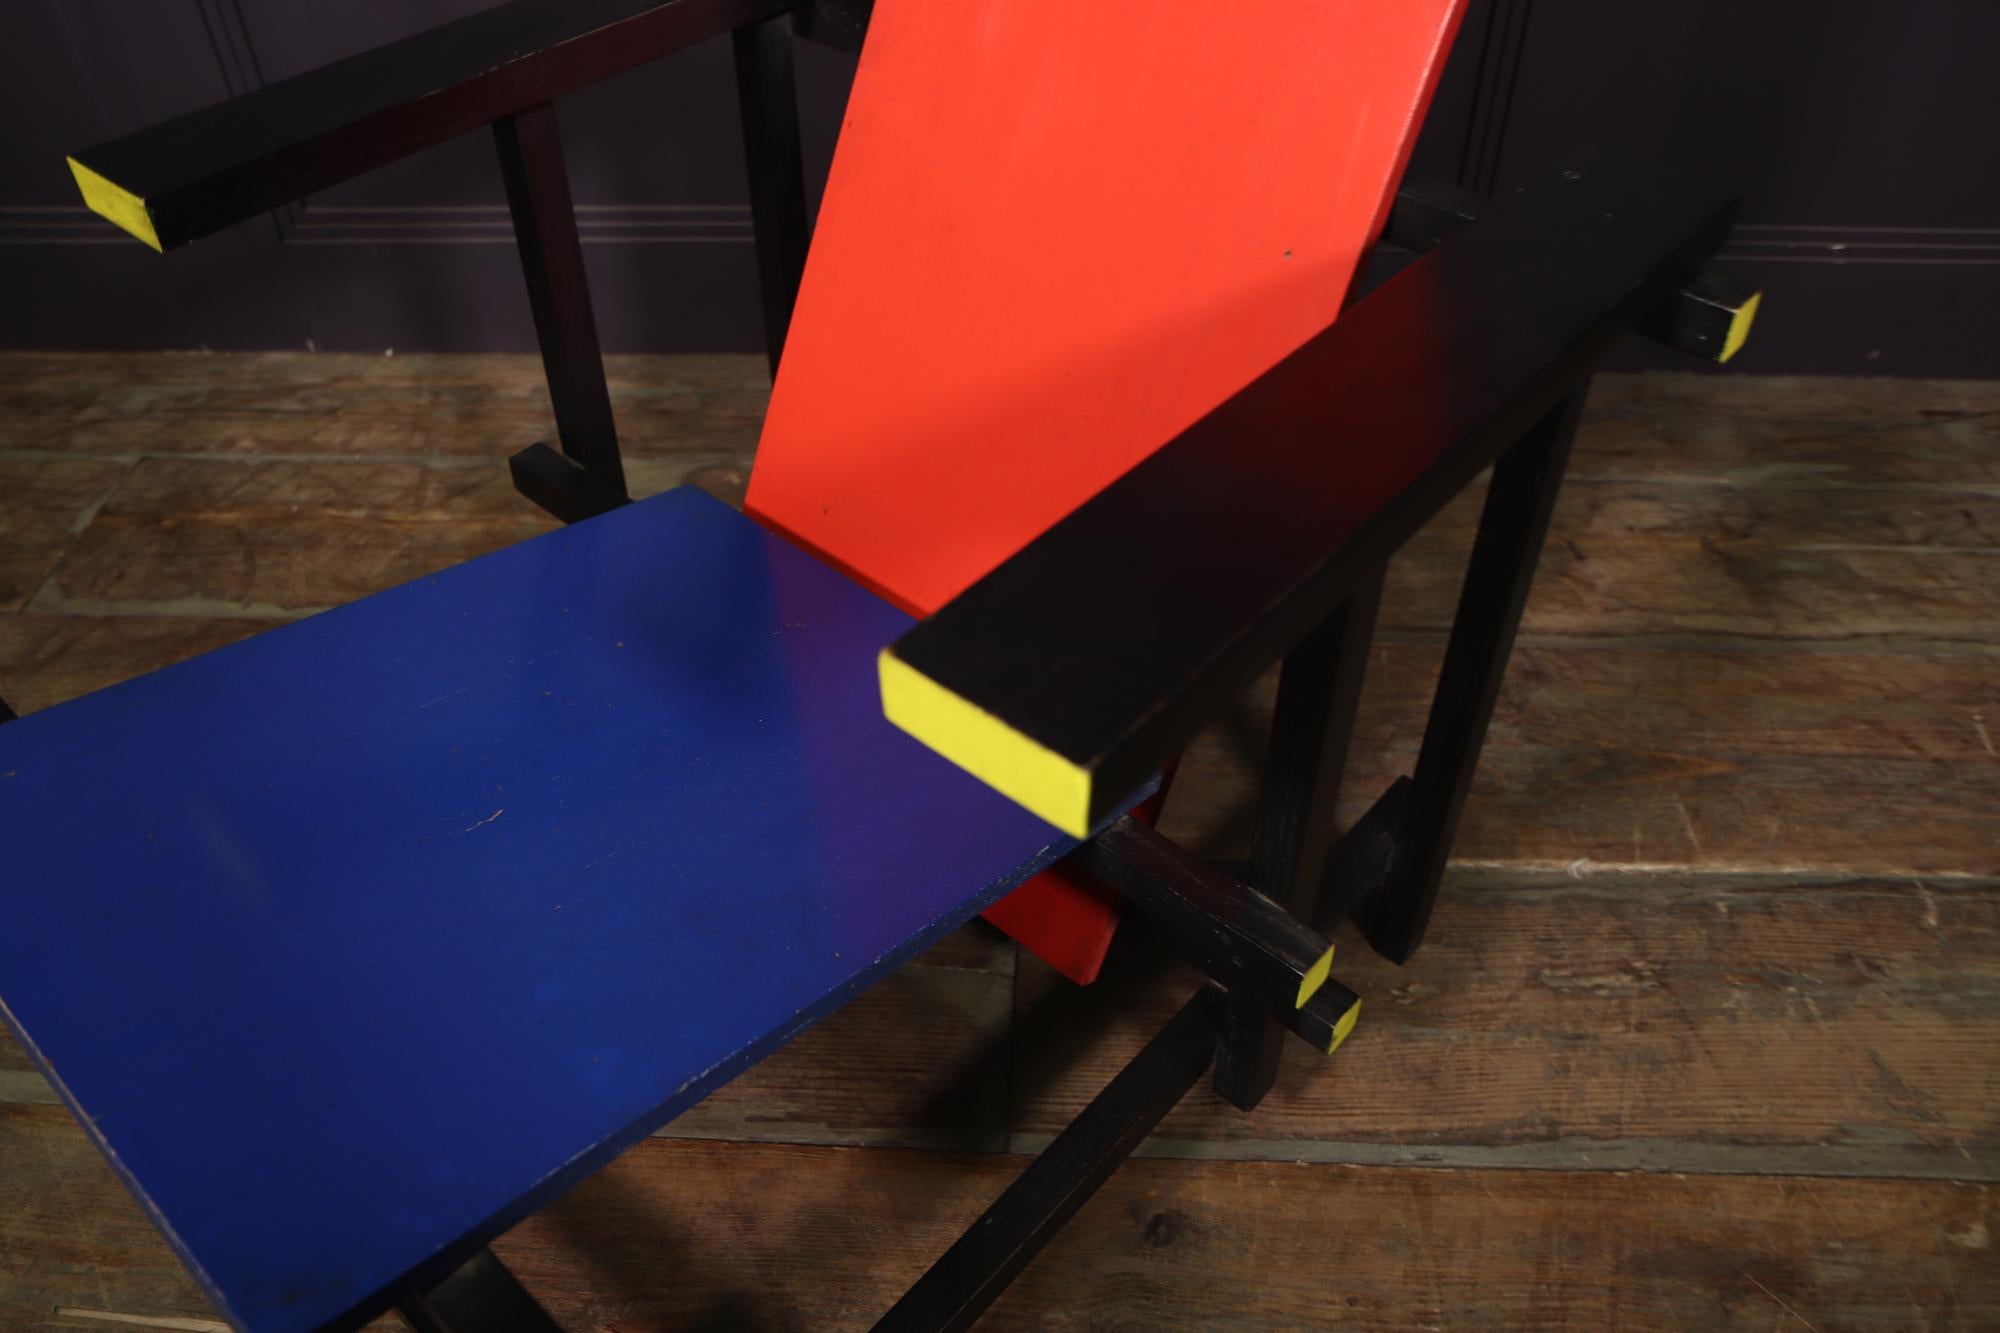 Beech Red Blue Chair by Gerrit Rietveld, c1970